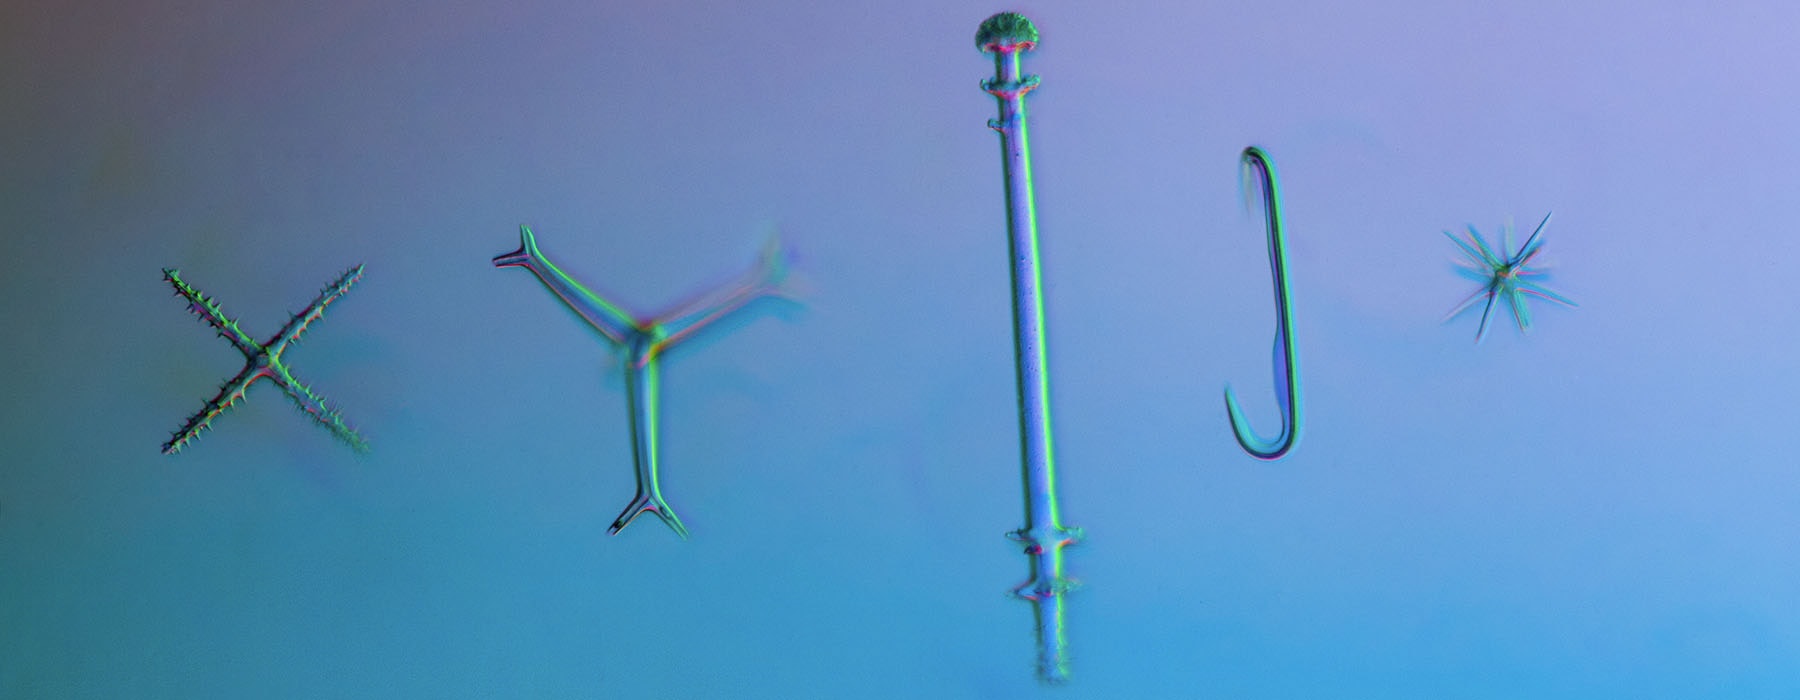 Microscopic photo of five sponges: one is shaped like an X; a three-bladed windmill; an enoki mushroom; a fish hook; and a little explosion